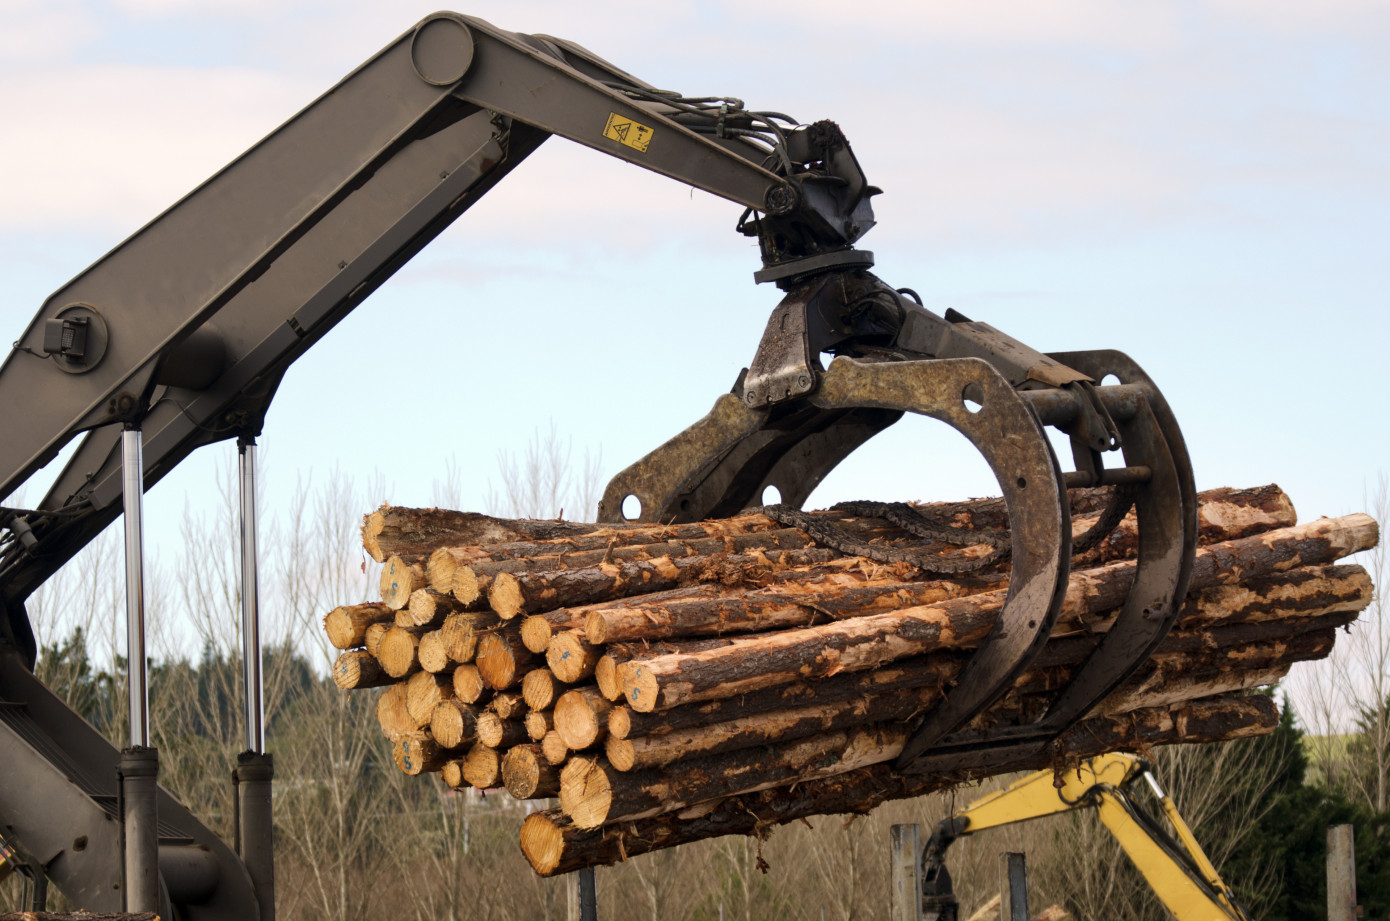 Imports of logs to Japan lose 27% in February